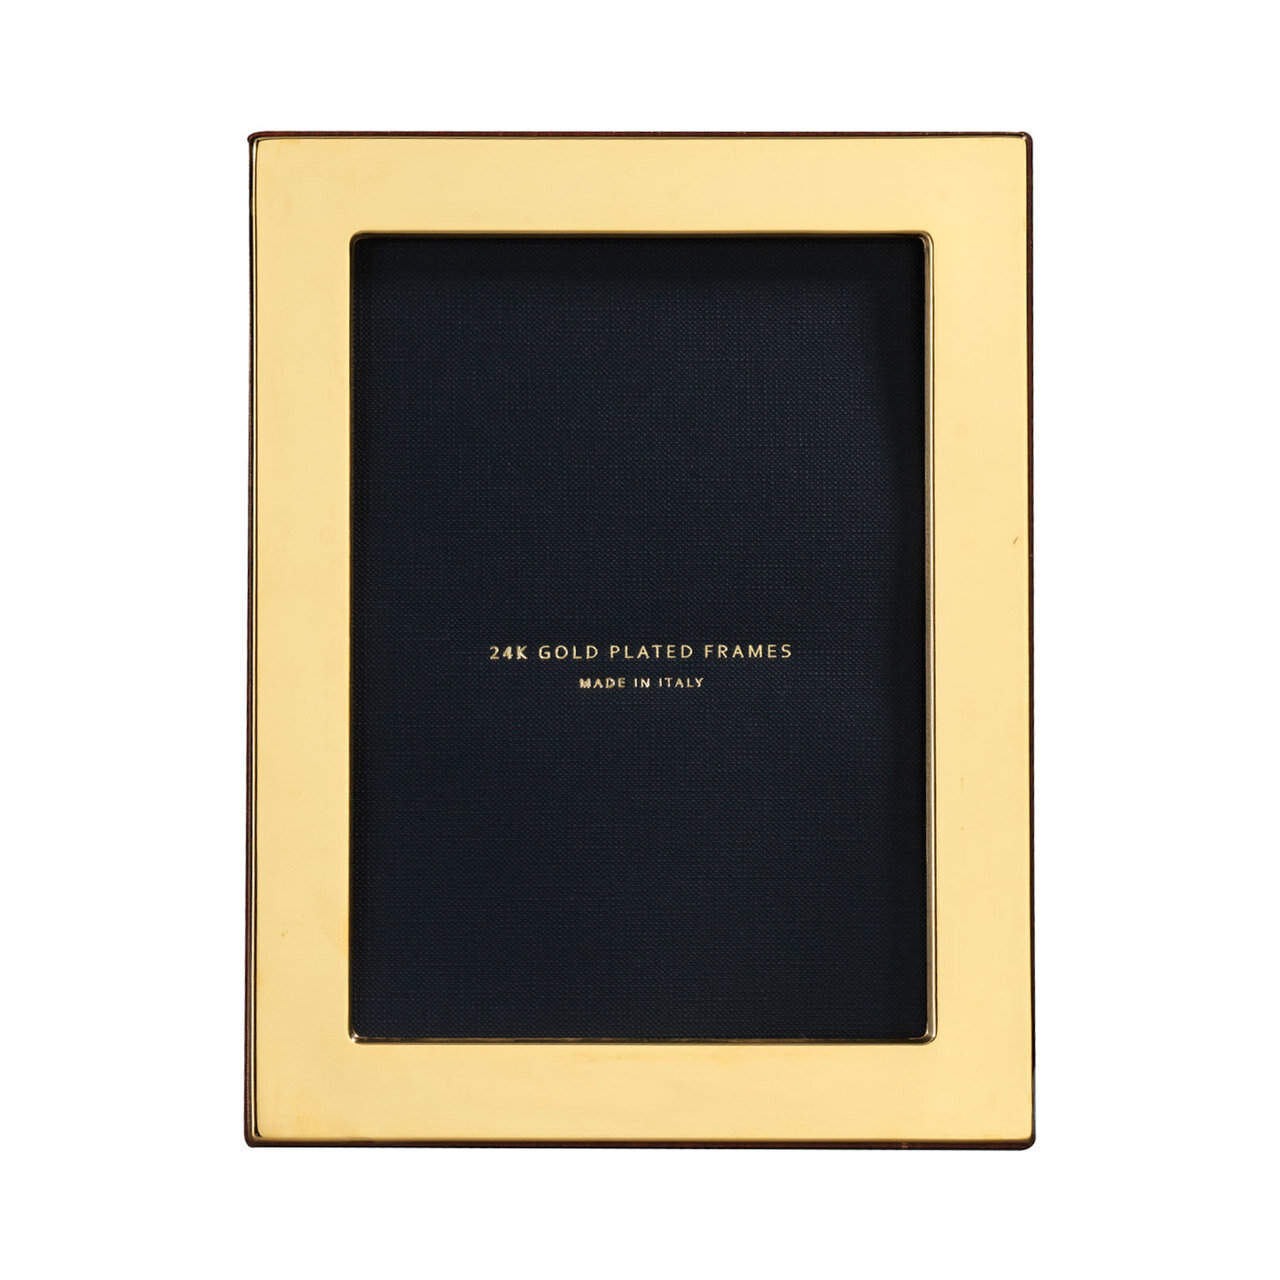 Cunill Plain 4 x 6 Inch Picture Frame - 24k Gold Plated 0.5 Microns